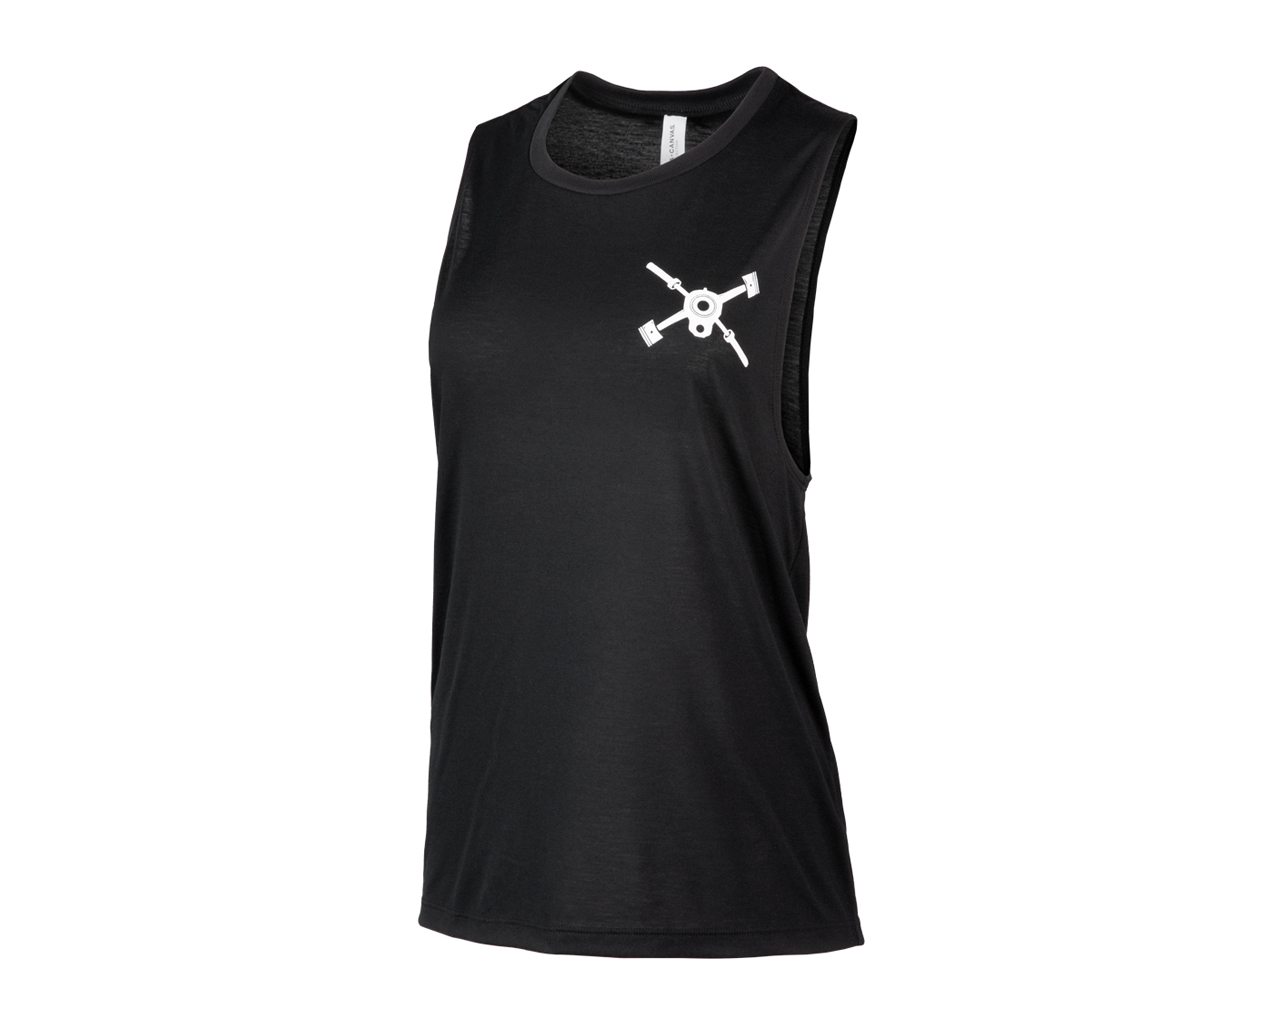 Dave Castro TDC Women's Muscle Tank